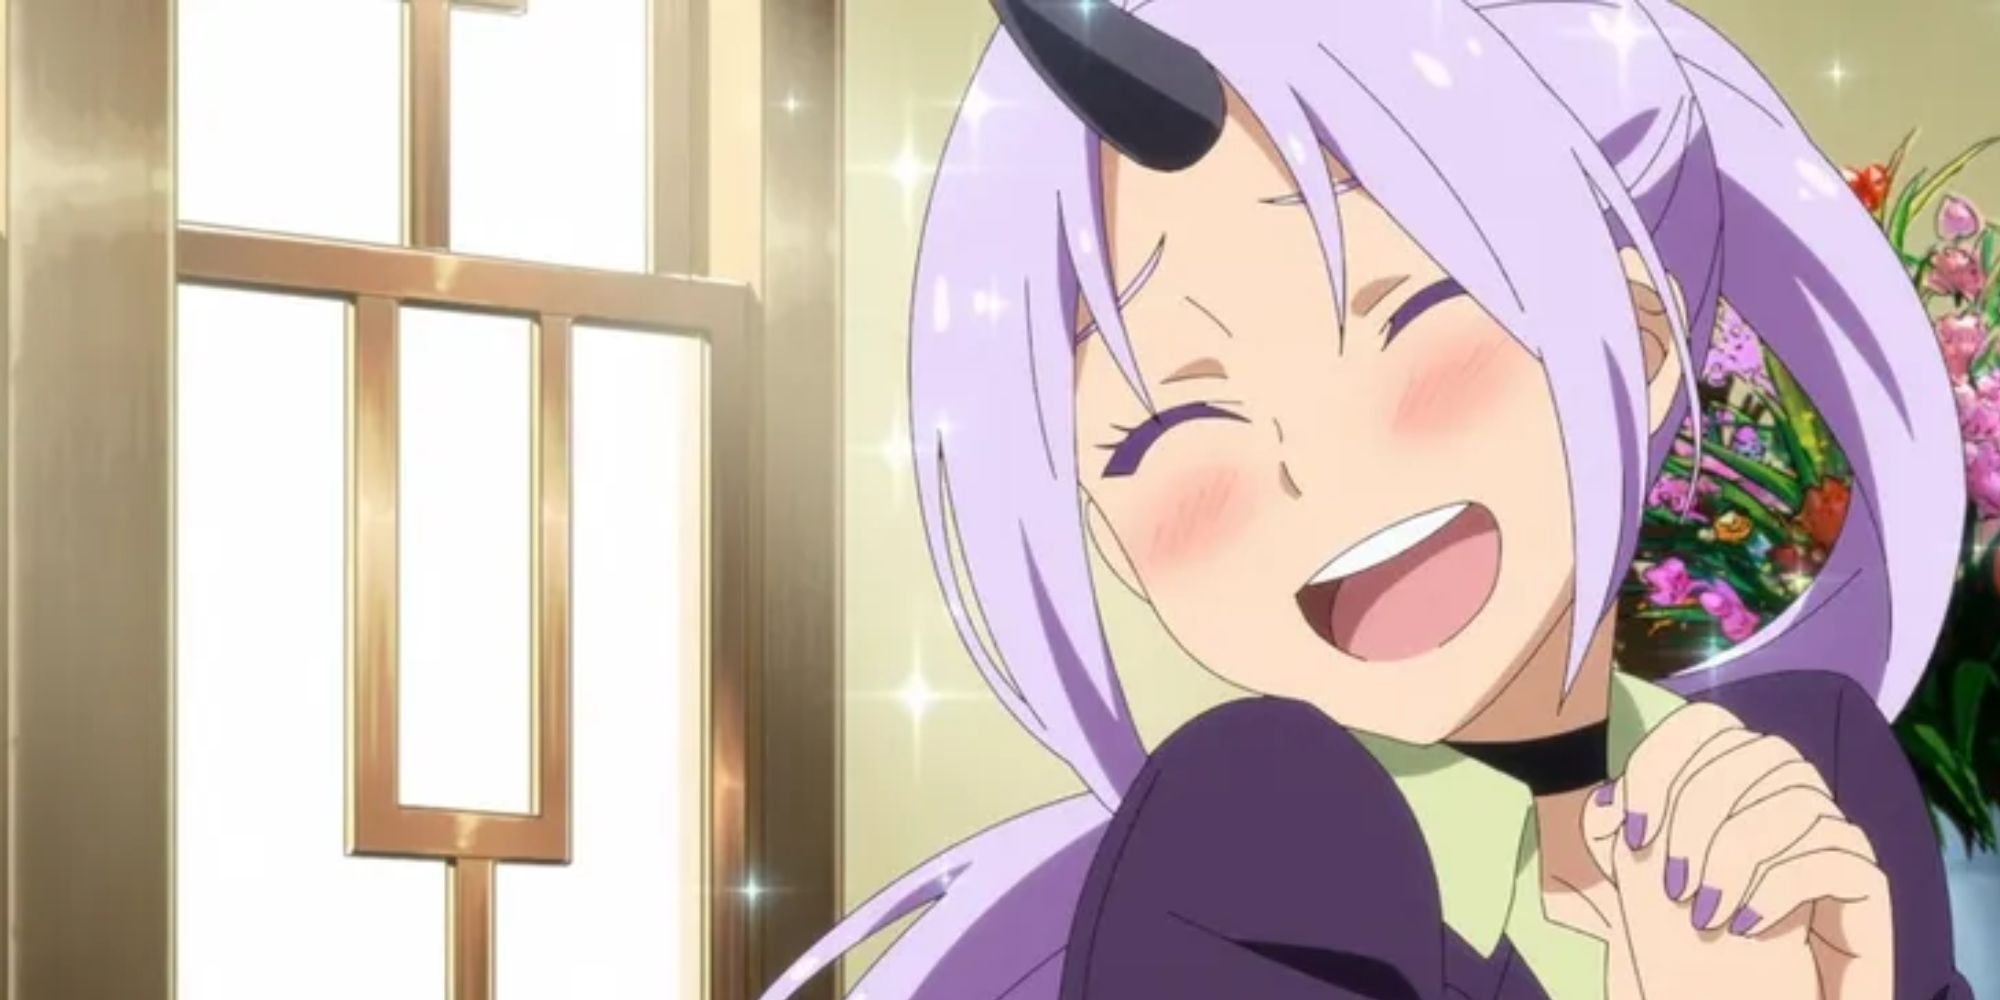 Shion From Reincarnated As A Slime Looking Excited